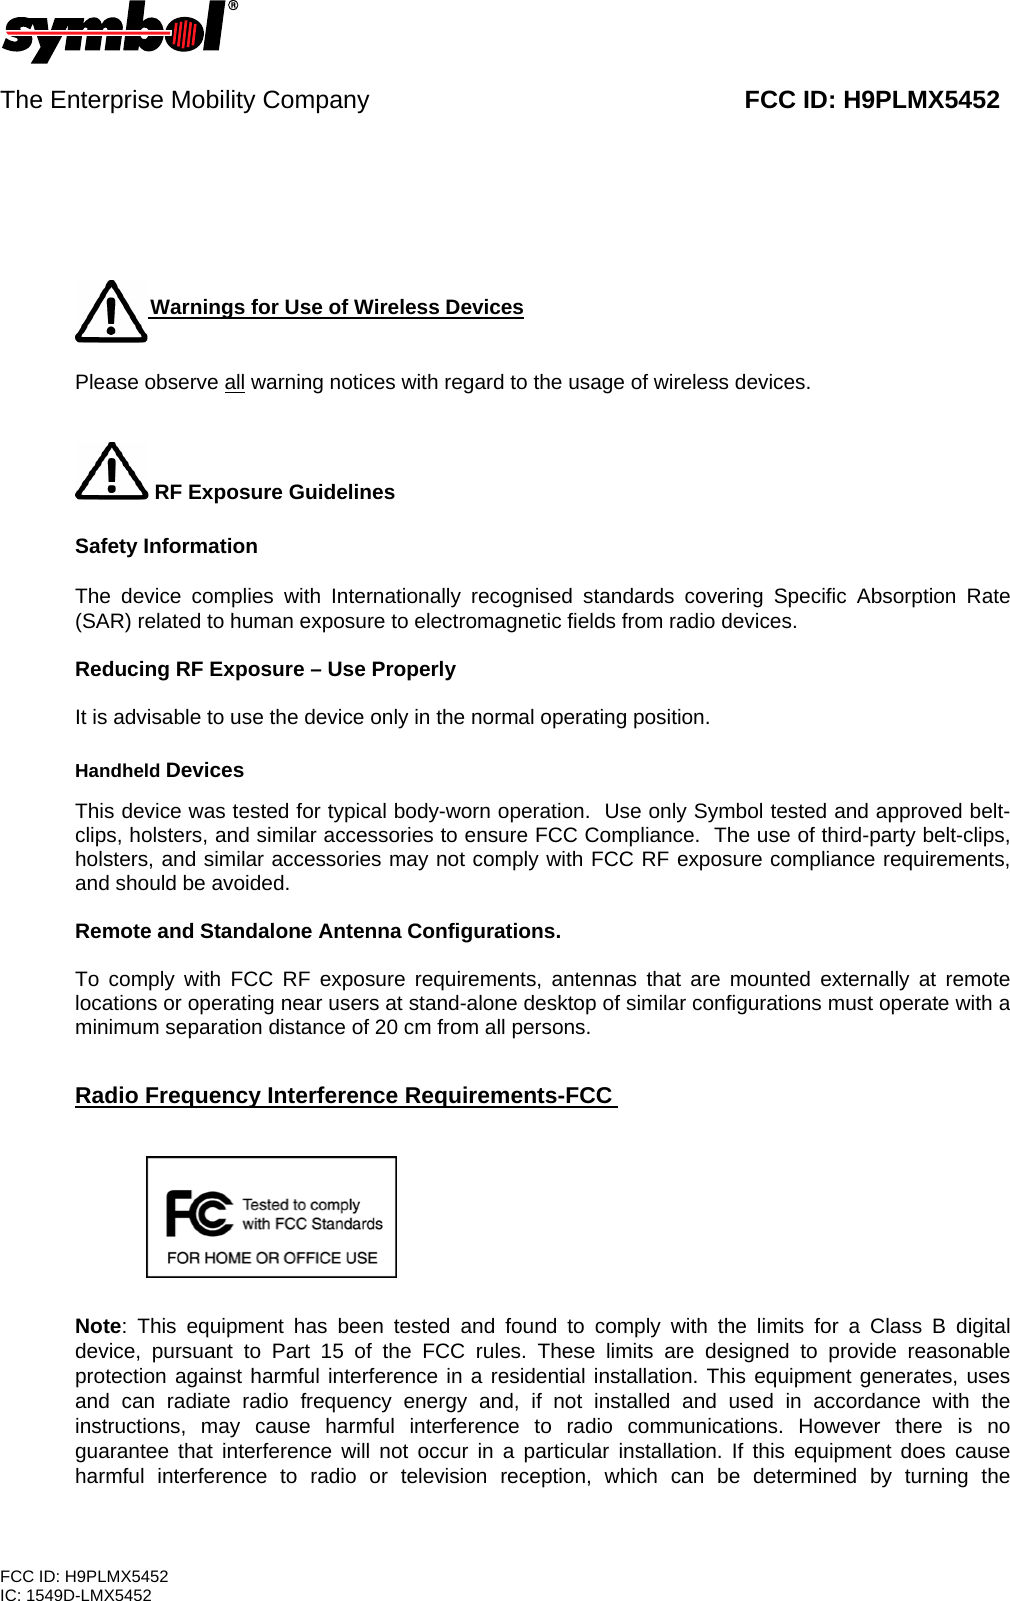    The Enterprise Mobility Company                                                      FCC ID: H9PLMX5452        Warni   Warnings for Use of Wireless Devices   Please observe all warning notices with regard to the usage of wireless devices.      RF Exposure Guidelines    Safety Information  The device complies with Internationally recognised standards covering Specific Absorption Rate (SAR) related to human exposure to electromagnetic fields from radio devices.  Reducing RF Exposure – Use Properly   It is advisable to use the device only in the normal operating position.    Handheld Devices  This device was tested for typical body-worn operation.  Use only Symbol tested and approved belt-clips, holsters, and similar accessories to ensure FCC Compliance.  The use of third-party belt-clips, holsters, and similar accessories may not comply with FCC RF exposure compliance requirements, and should be avoided.     Remote and Standalone Antenna Configurations.  To comply with FCC RF exposure requirements, antennas that are mounted externally at remote locations or operating near users at stand-alone desktop of similar configurations must operate with a minimum separation distance of 20 cm from all persons.    Radio Frequency Interference Requirements-FCC         Note: This equipment has been tested and found to comply with the limits for a Class B digital device, pursuant to Part 15 of the FCC rules. These limits are designed to provide reasonable protection against harmful interference in a residential installation. This equipment generates, uses and can radiate radio frequency energy and, if not installed and used in accordance with the instructions, may cause harmful interference to radio communications. However there is no guarantee that interference will not occur in a particular installation. If this equipment does cause harmful interference to radio or television reception, which can be determined by turning the FCC ID: H9PLMX5452 IC: 1549D-LMX5452 